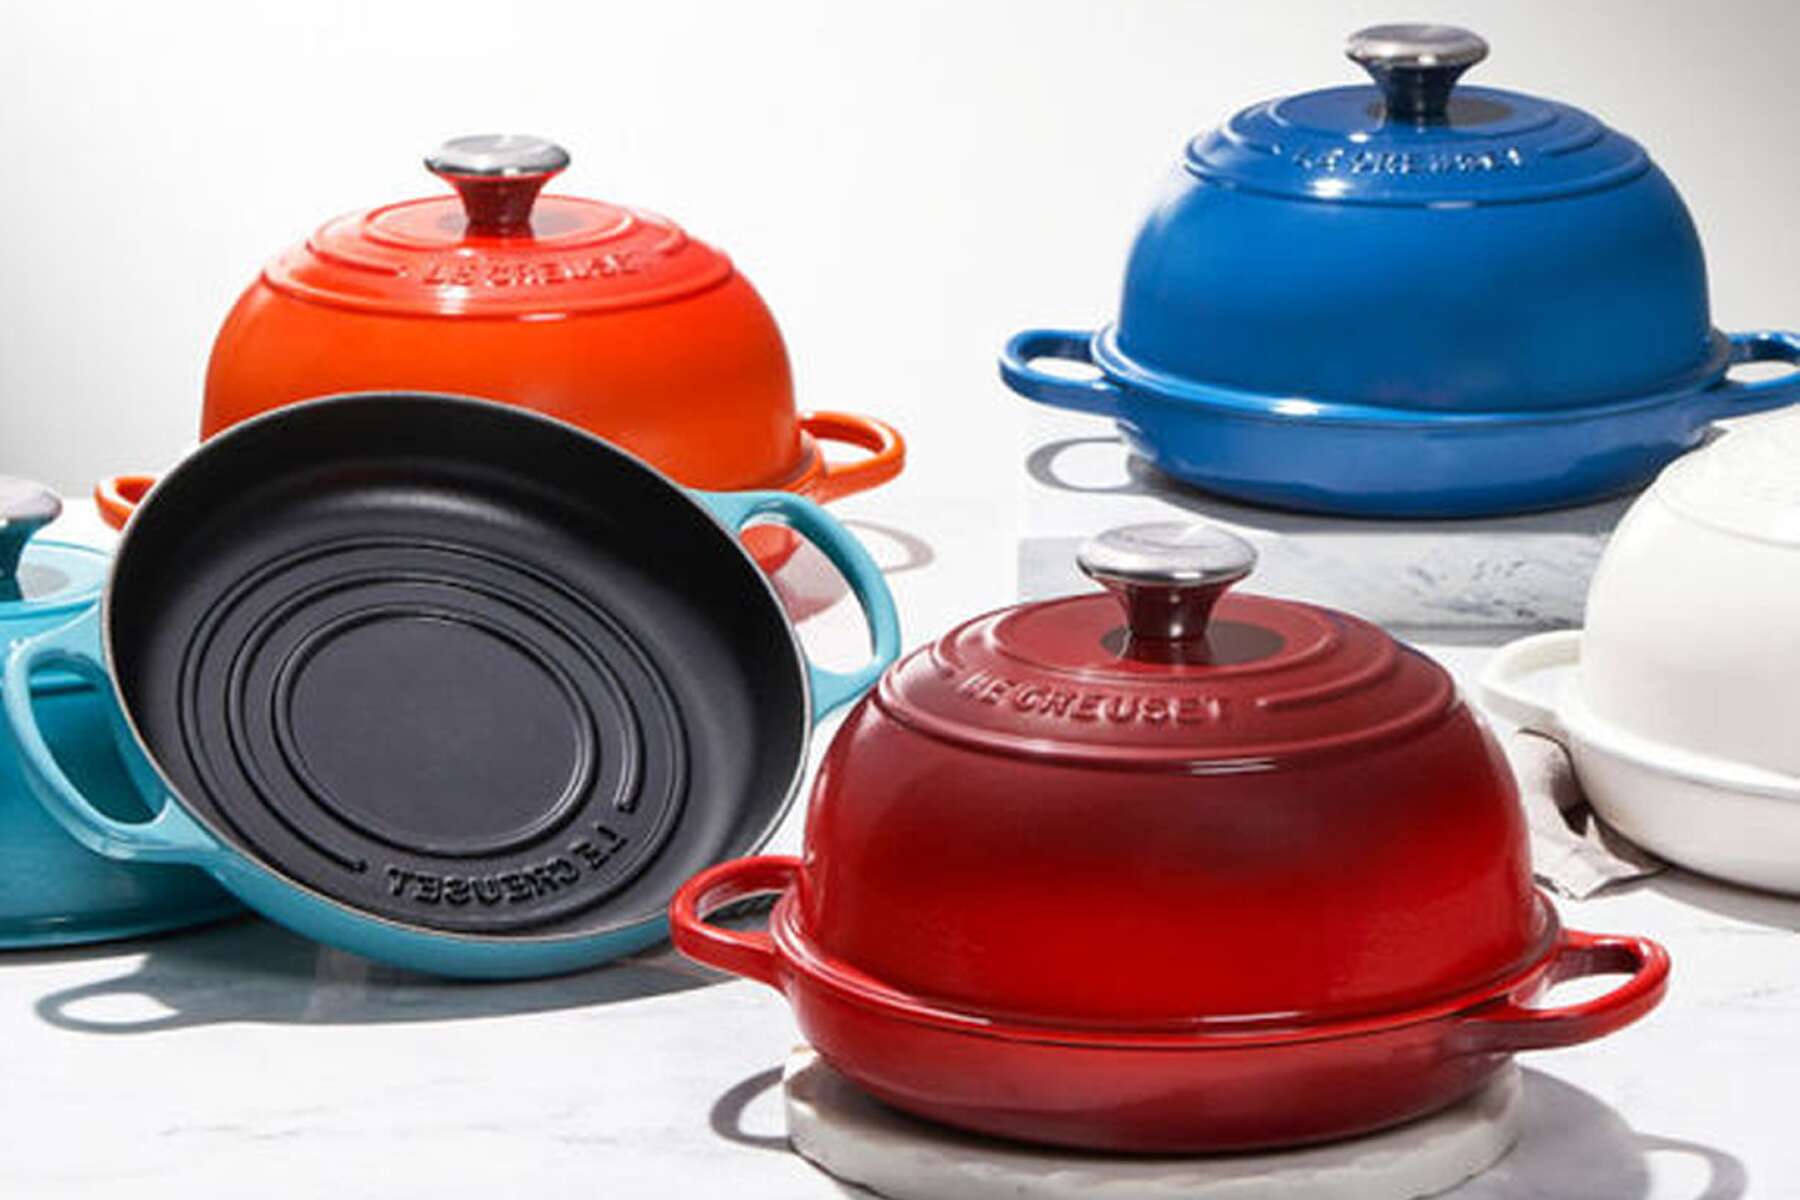 Le Creuset releases cast iron bread oven - Chef at Home